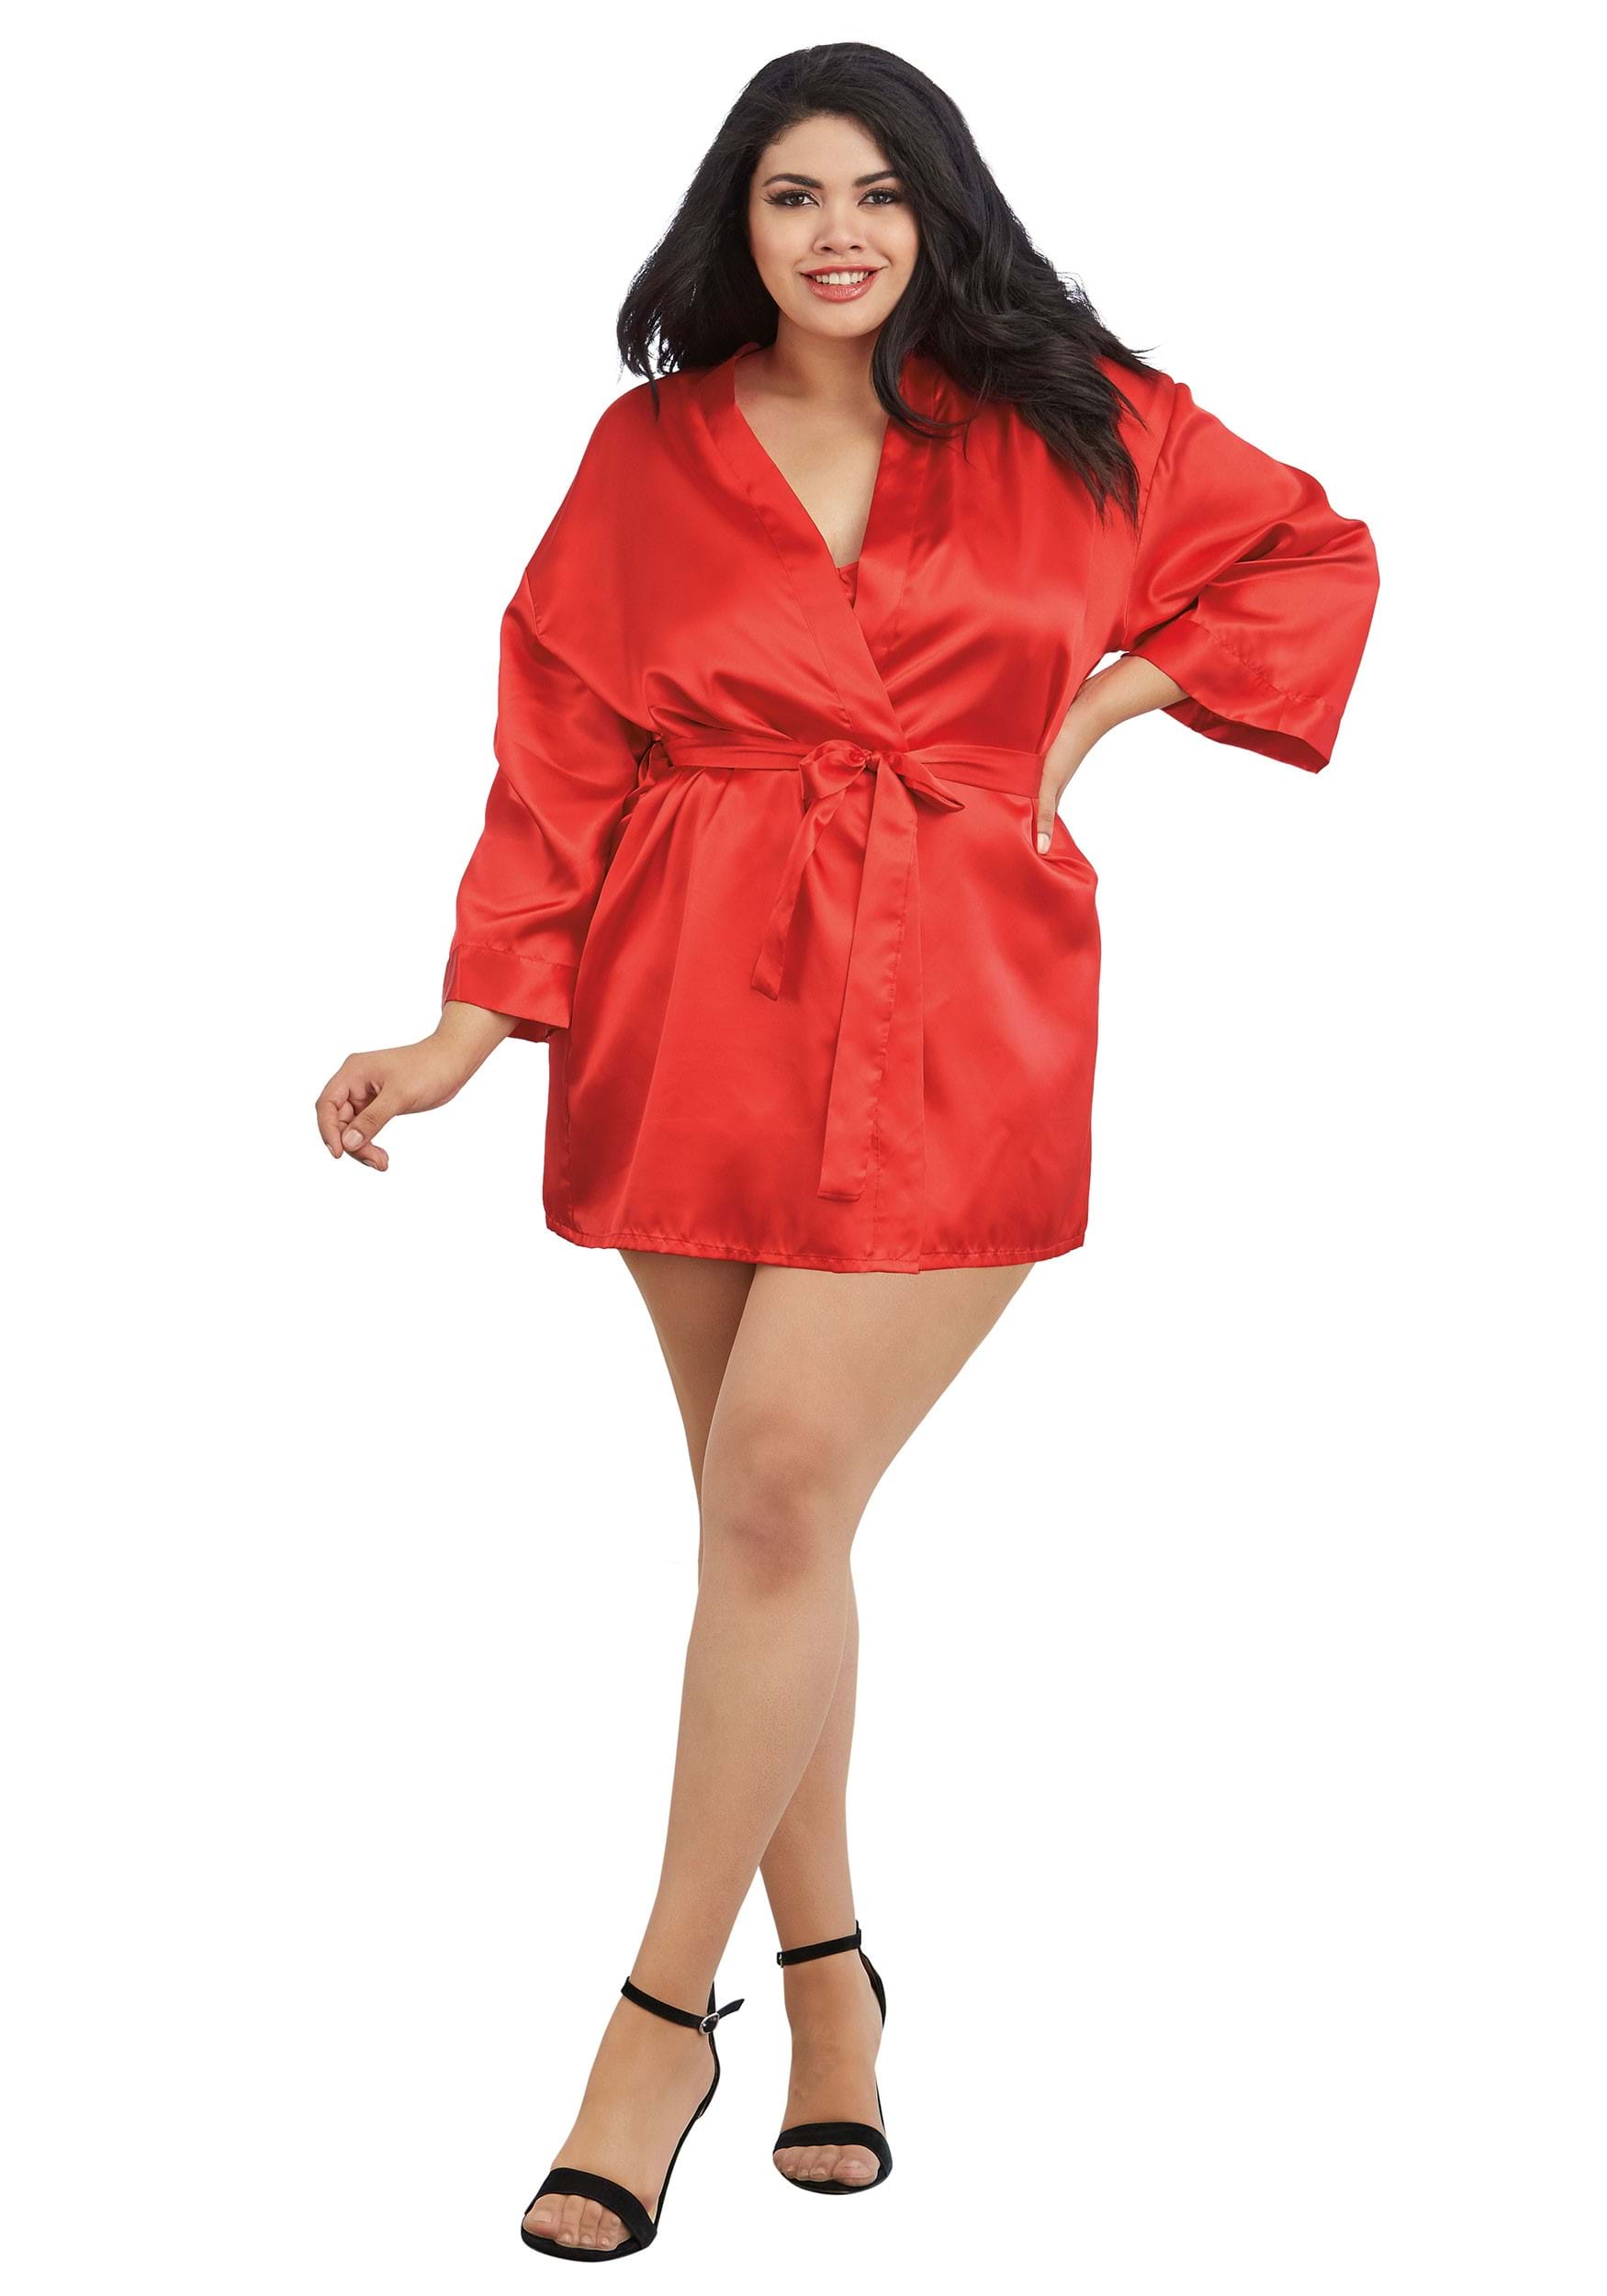 Plus Size Red Charmeuse Chemise And Robe , Women's Lingerie